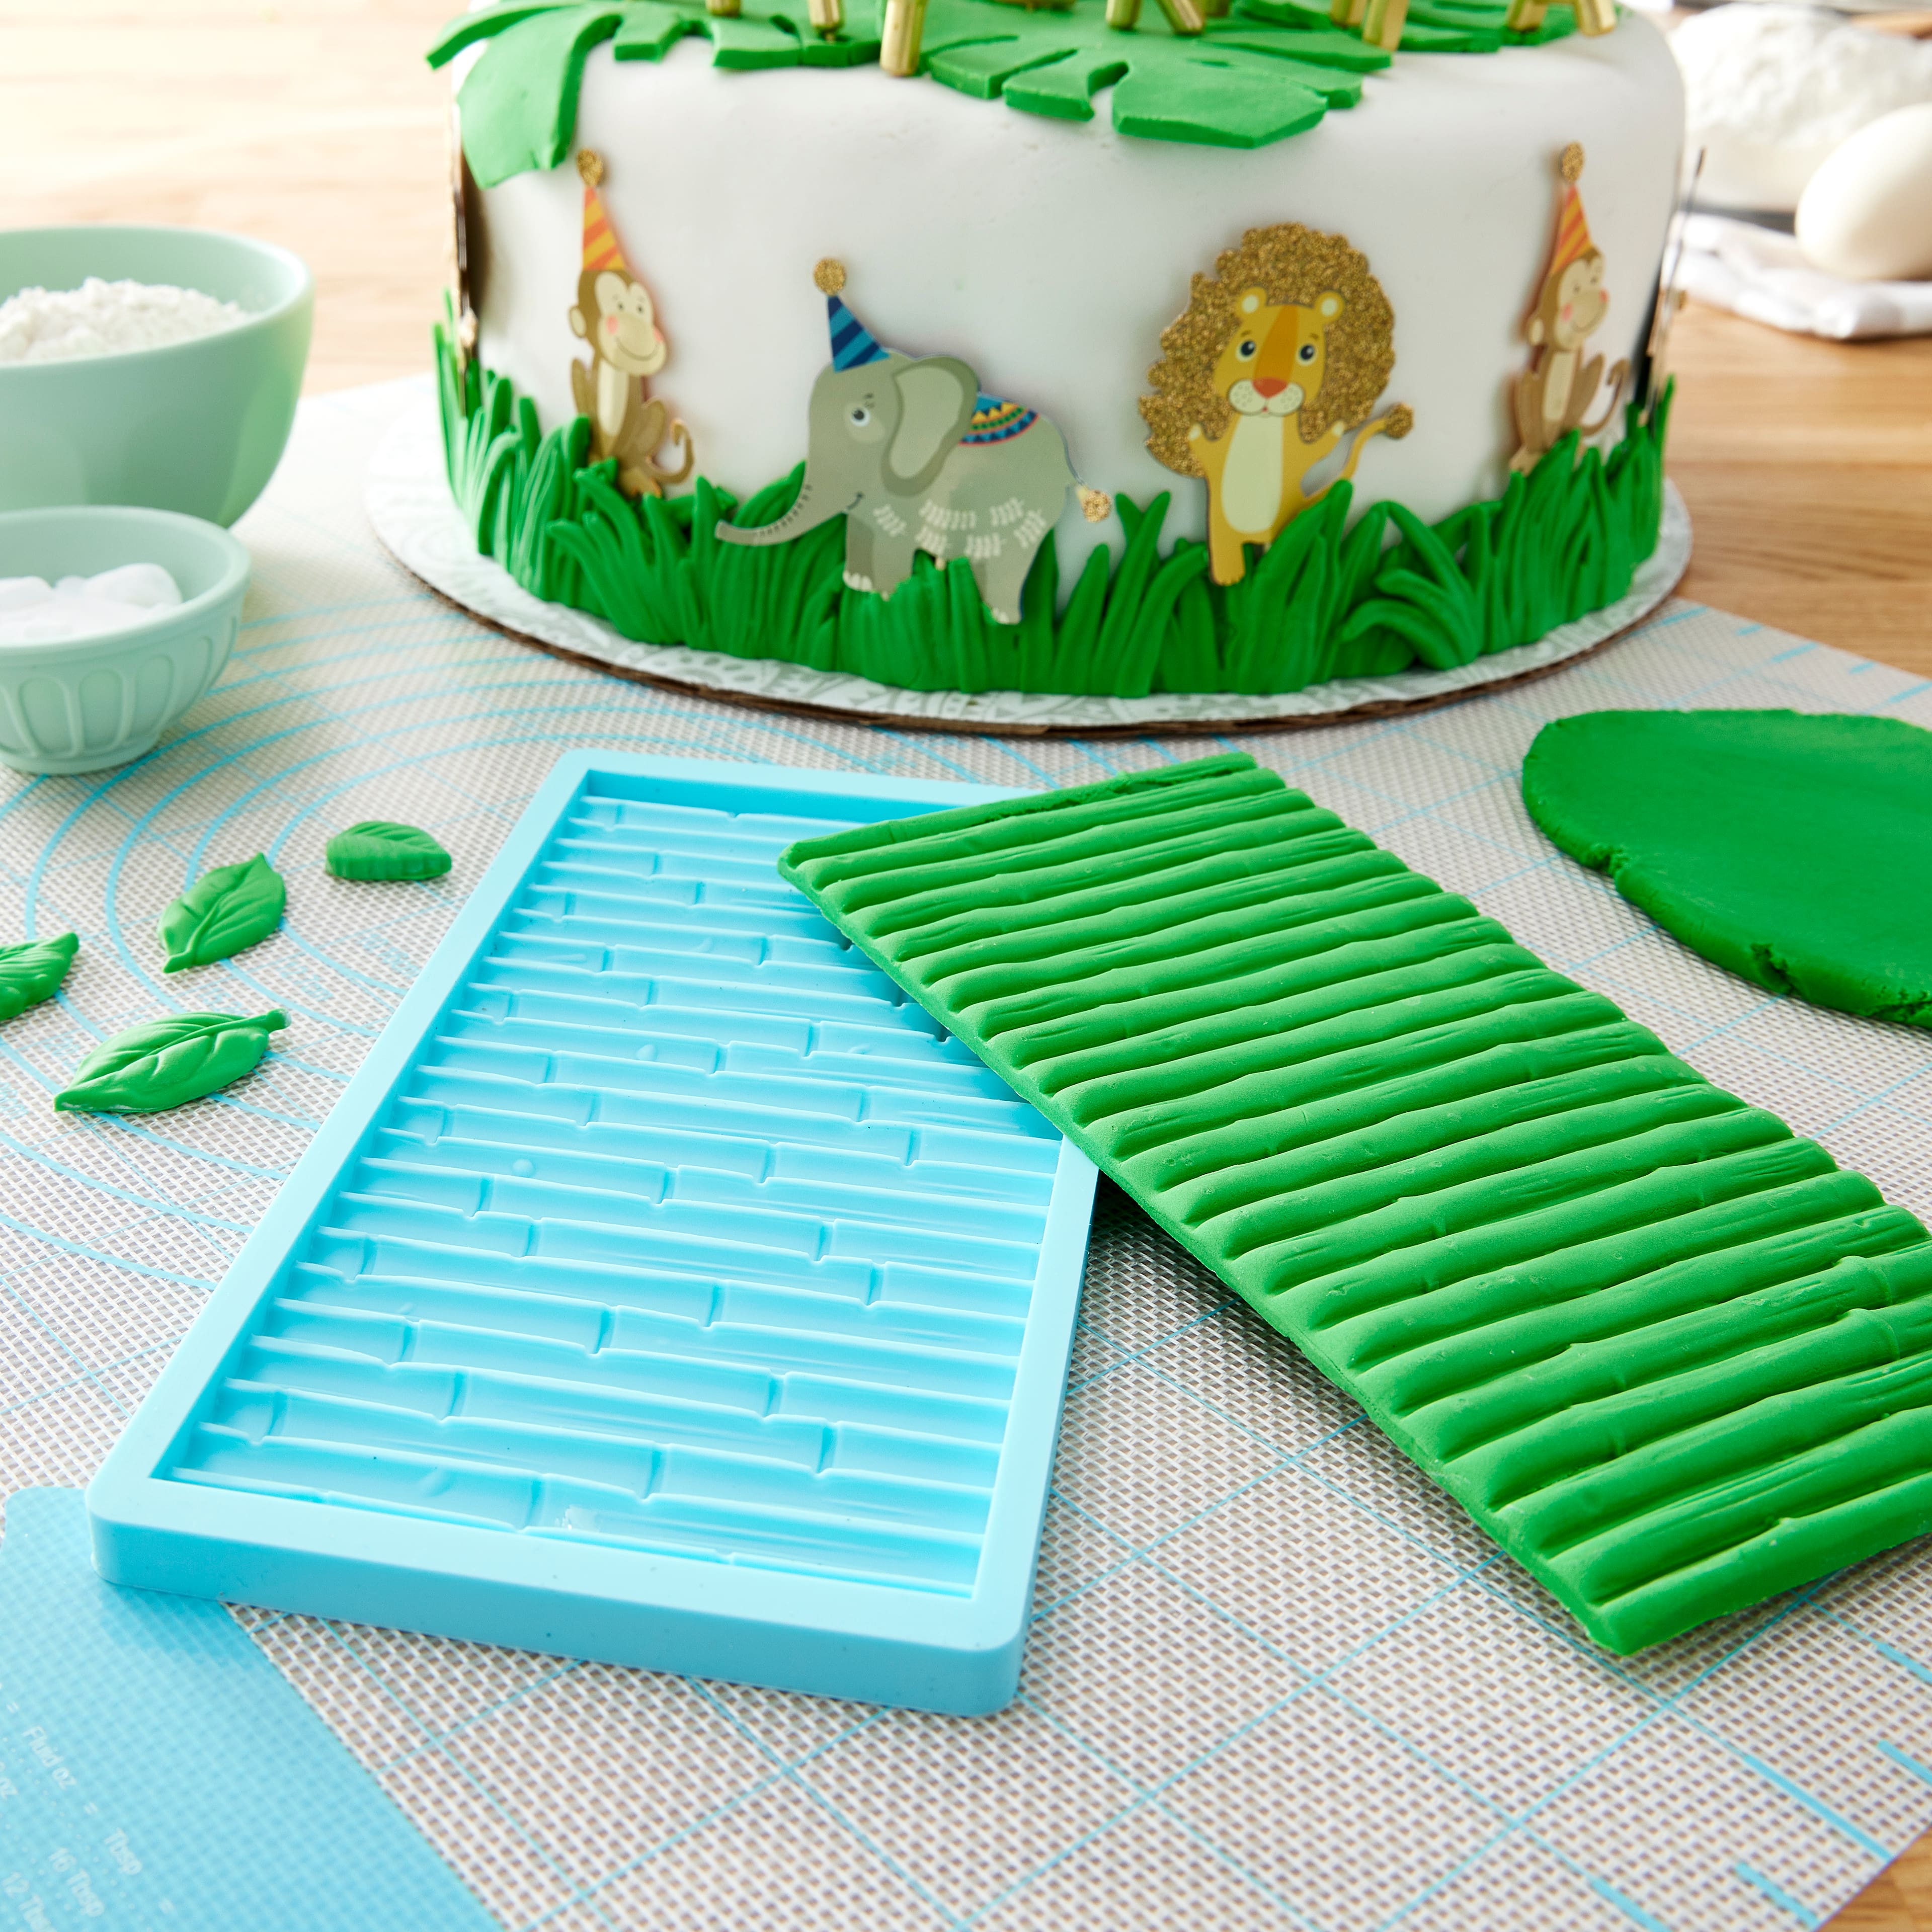 6 Pack: Bamboo Silicone Fondant Mold by Celebrate It&#xAE;